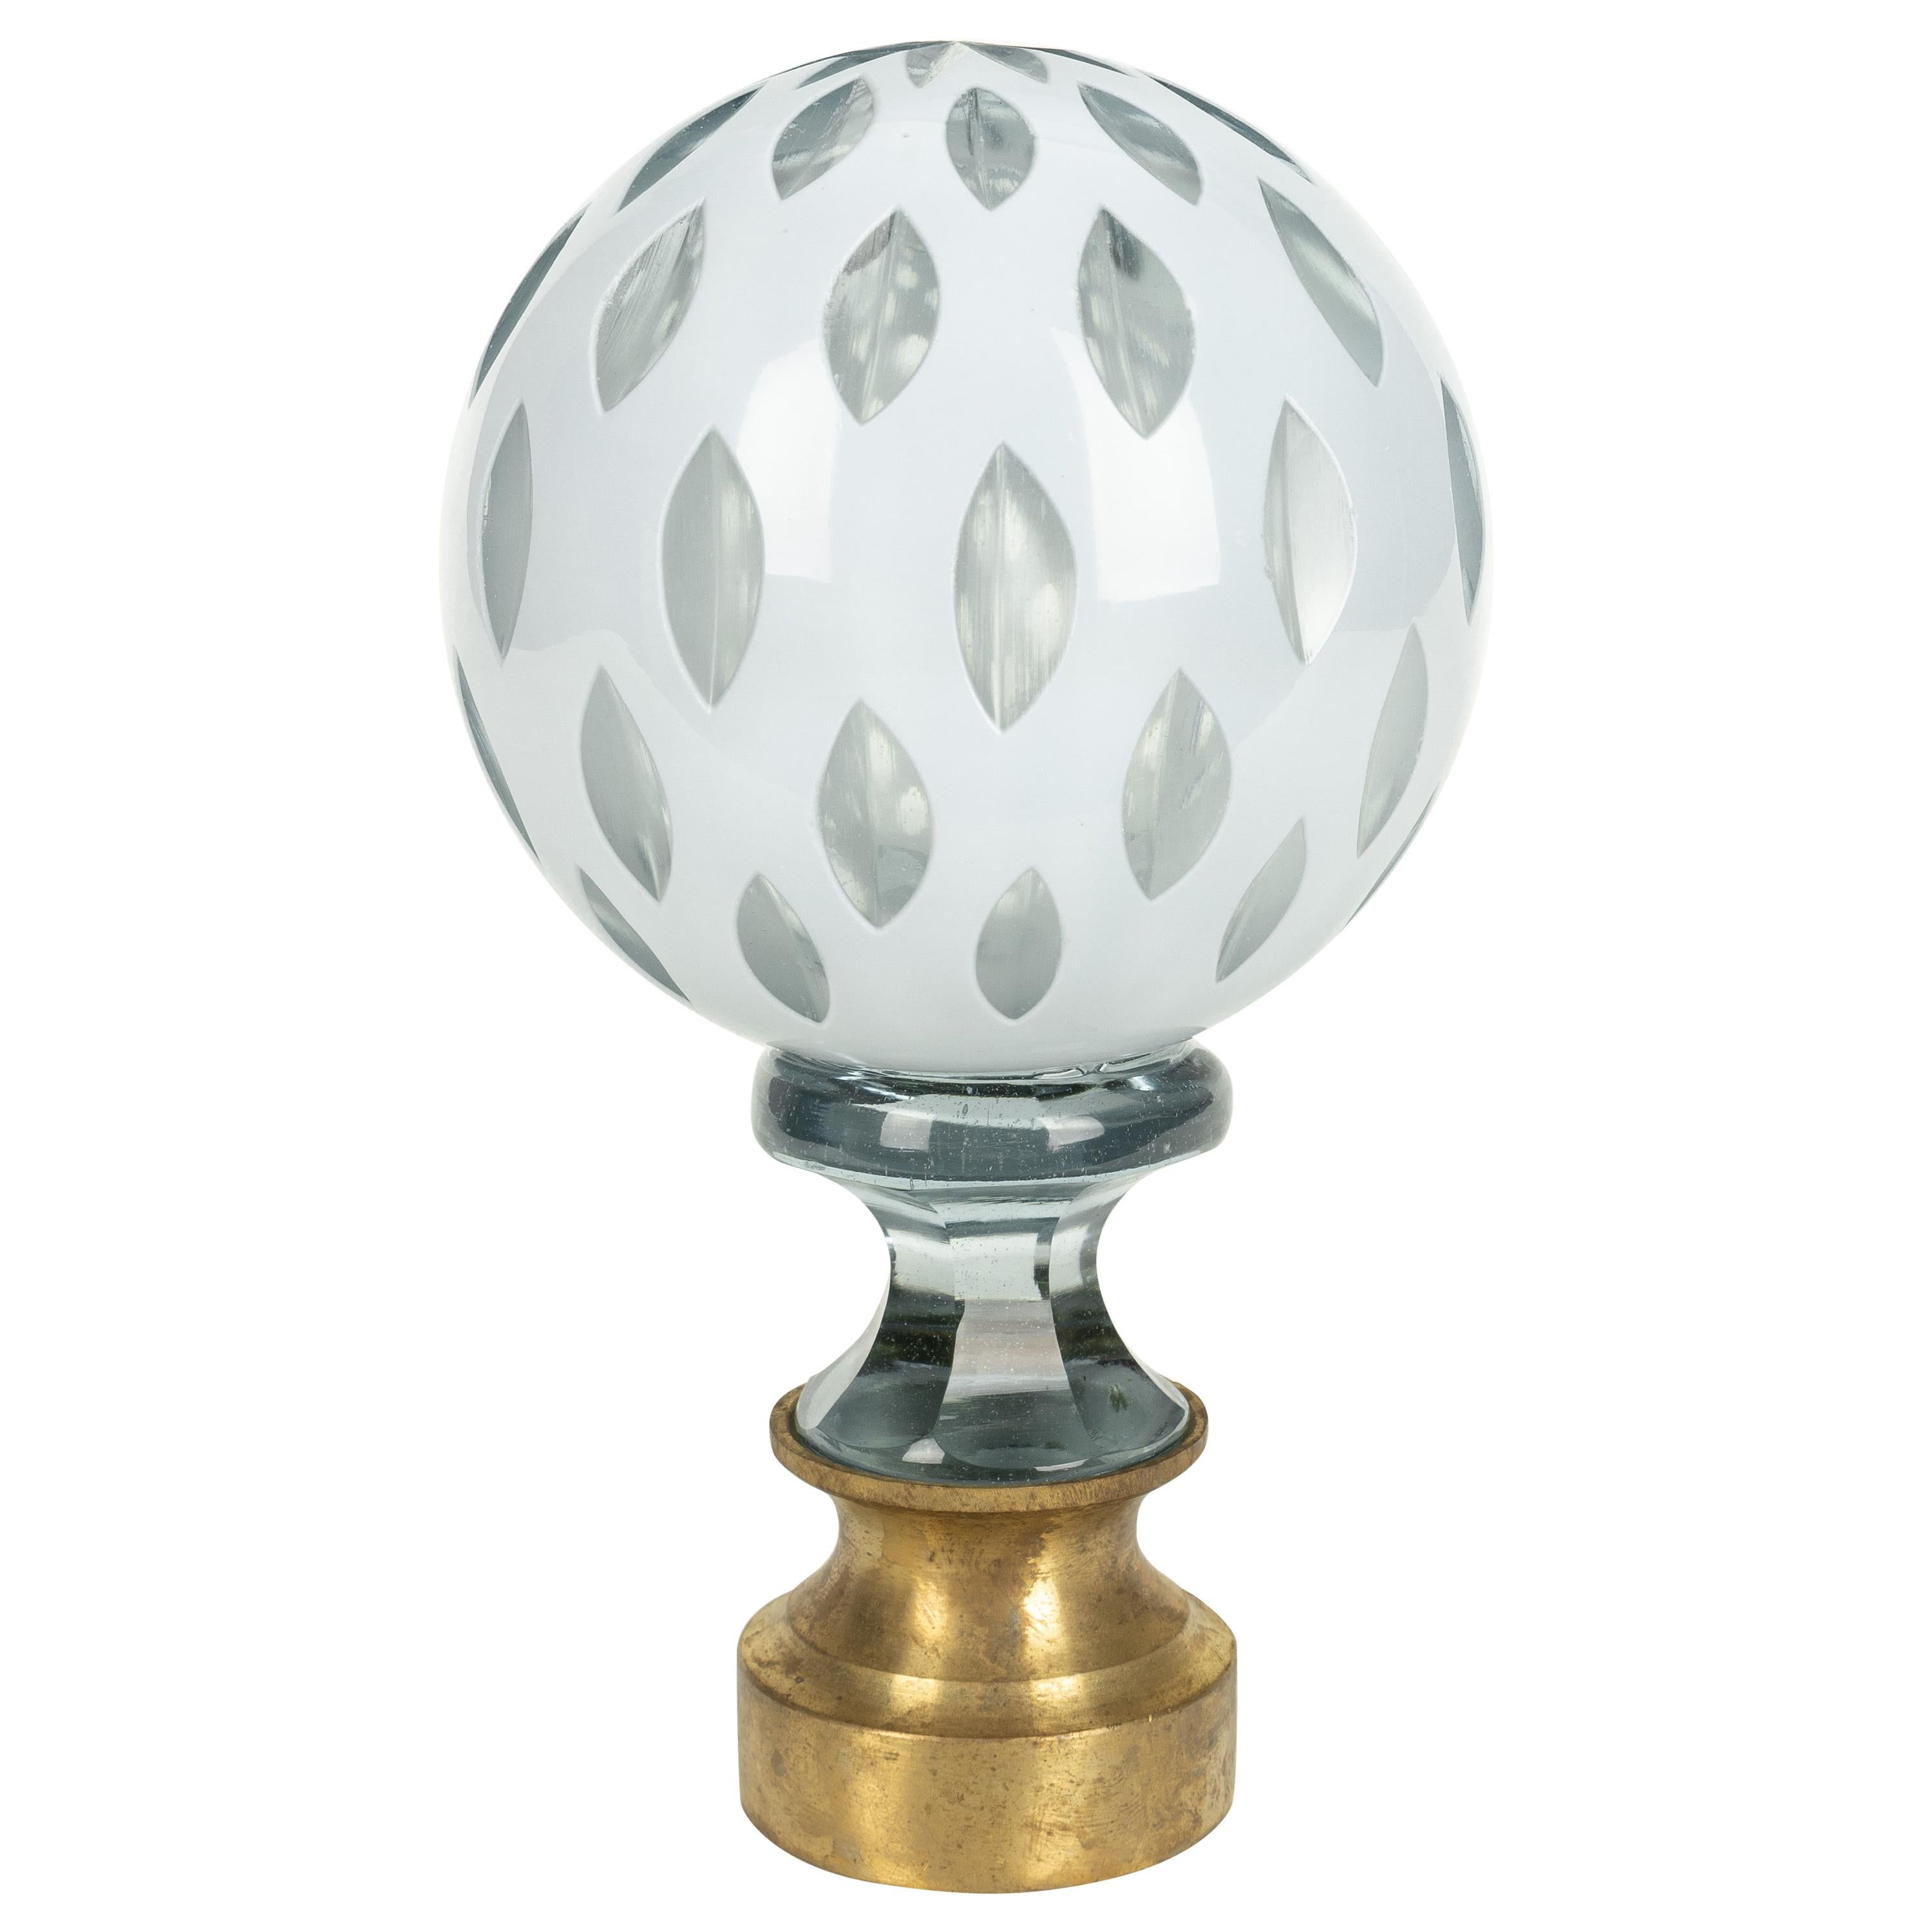 French Crystal Glass Boule d'escalier or Newel Post Finial